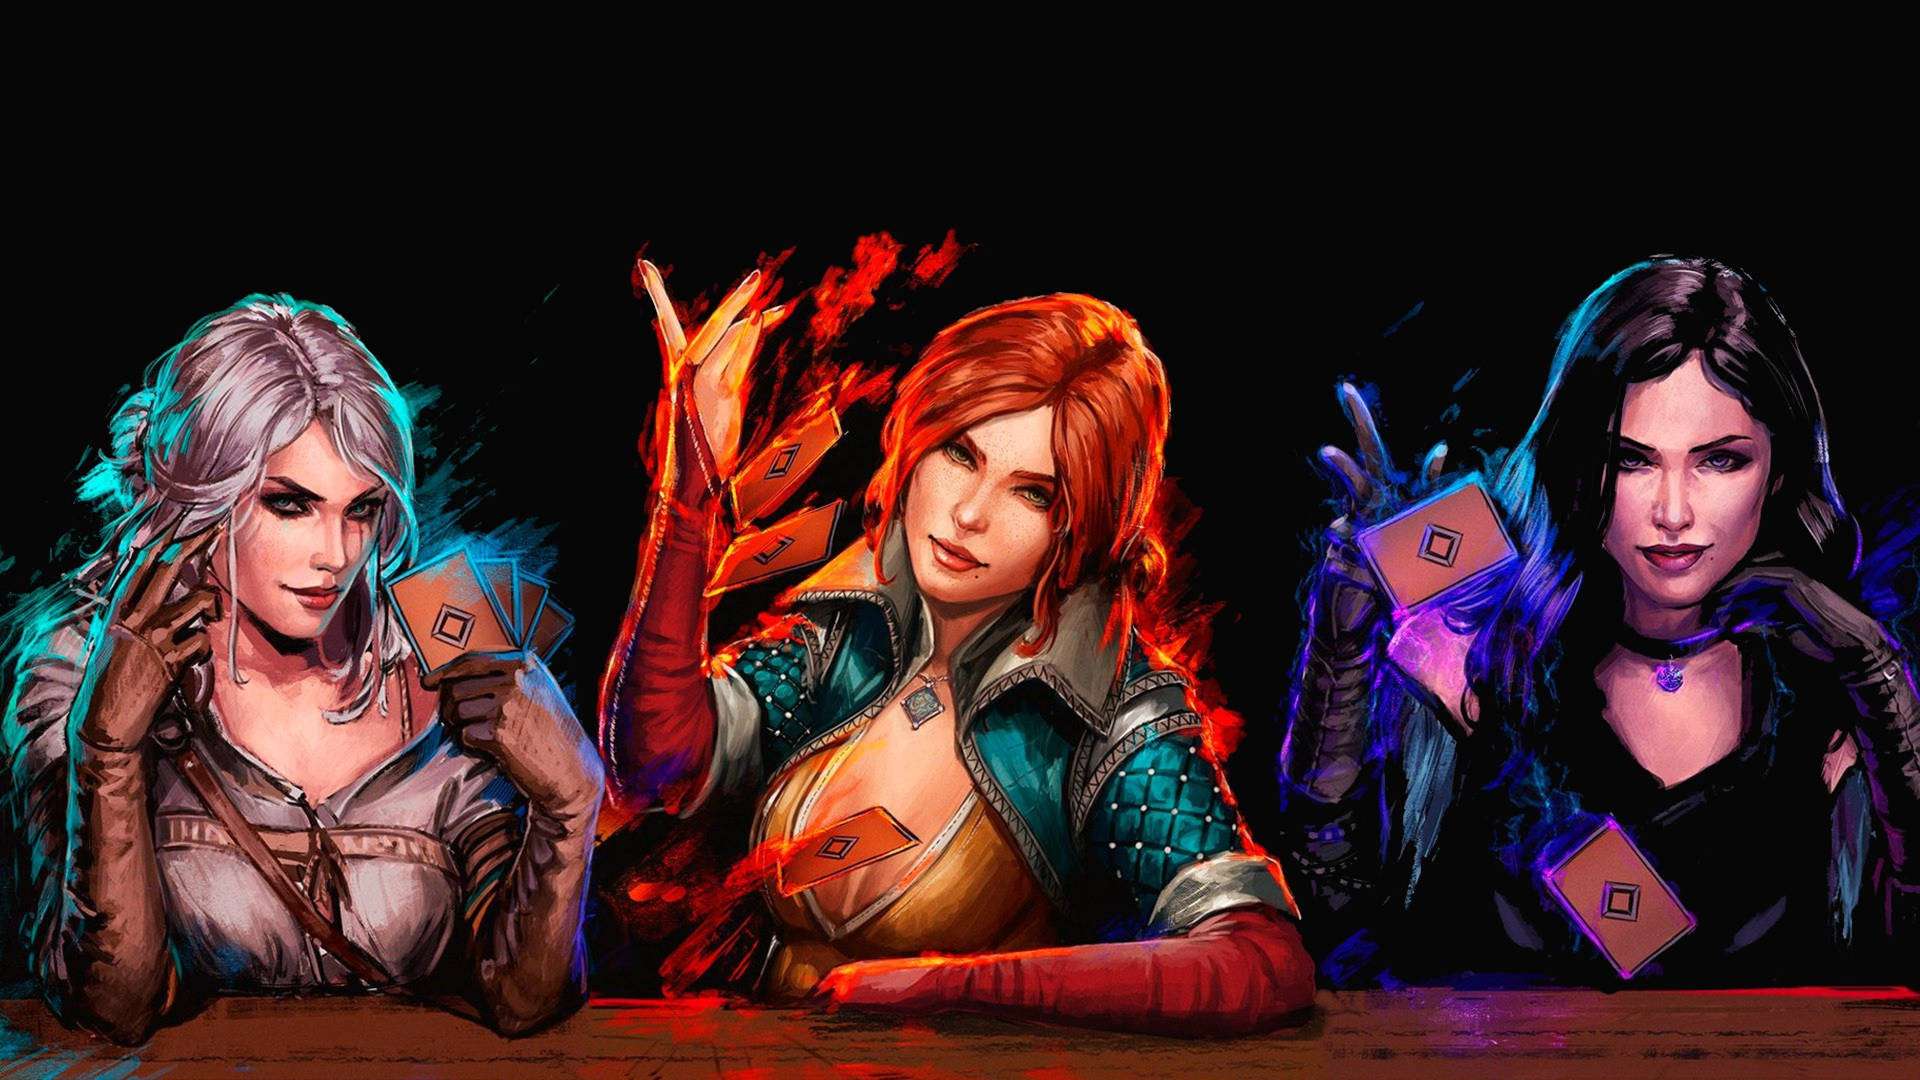 Witcher 3 4k Female Protagonists Wallpaper